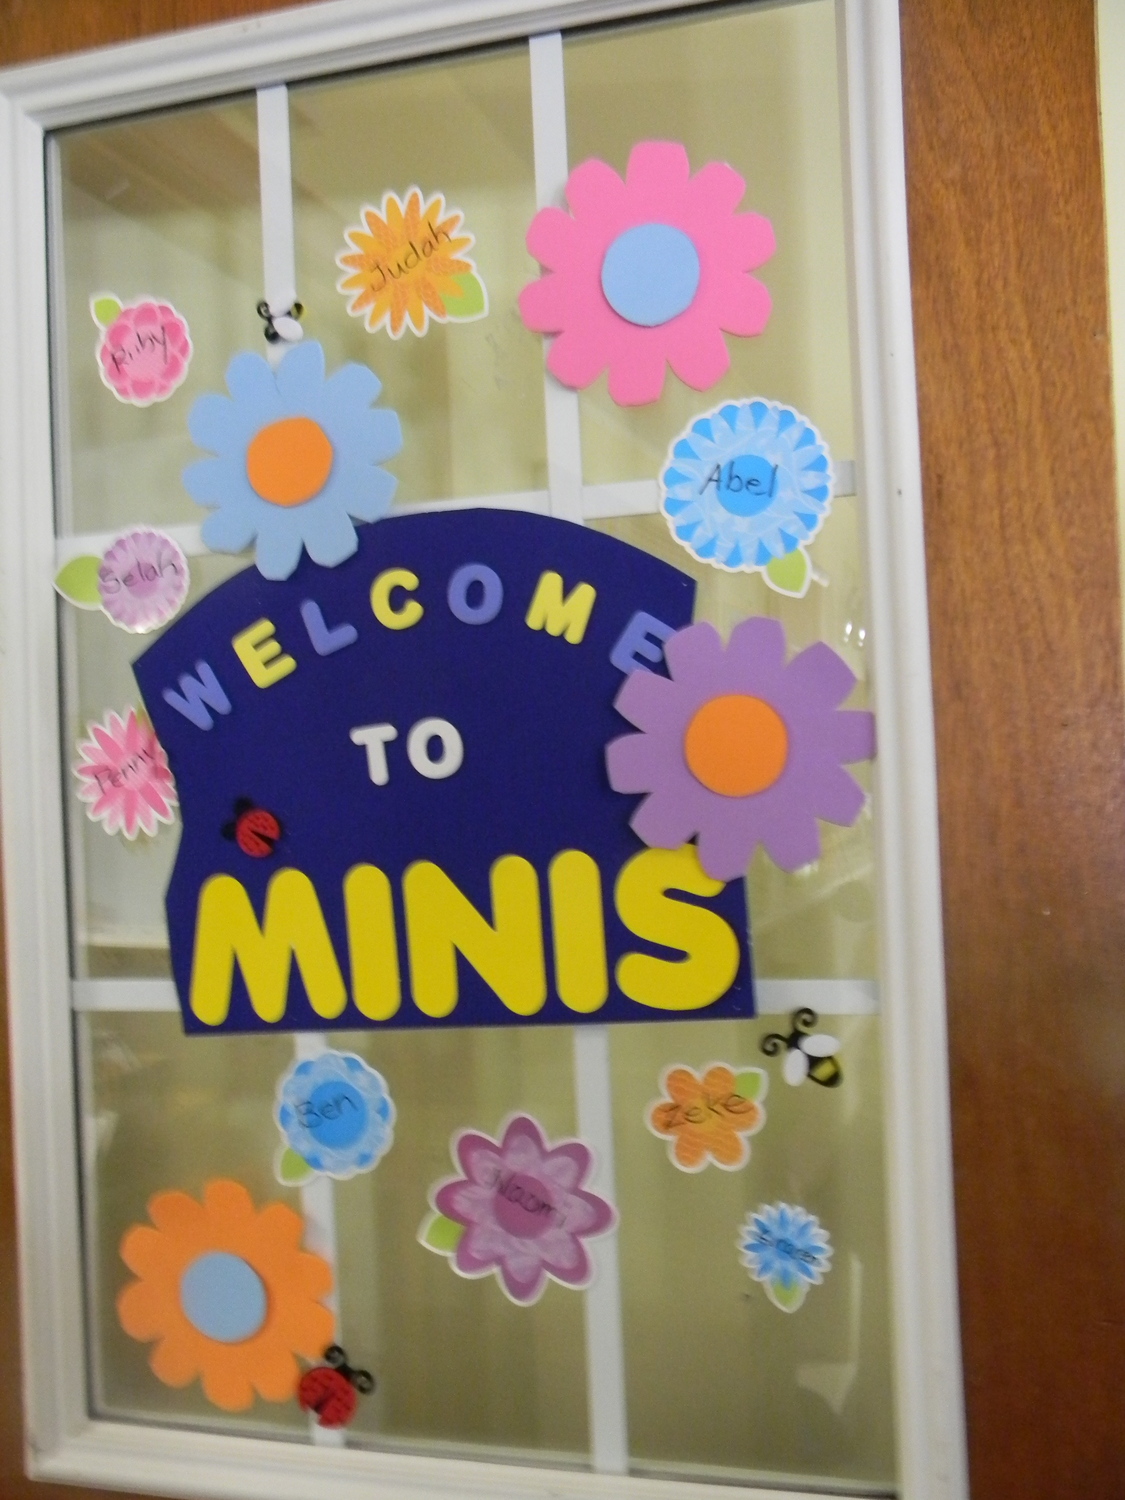 The door to Judah's nursery room -- he's in "Minis" with the other 1 year old kids